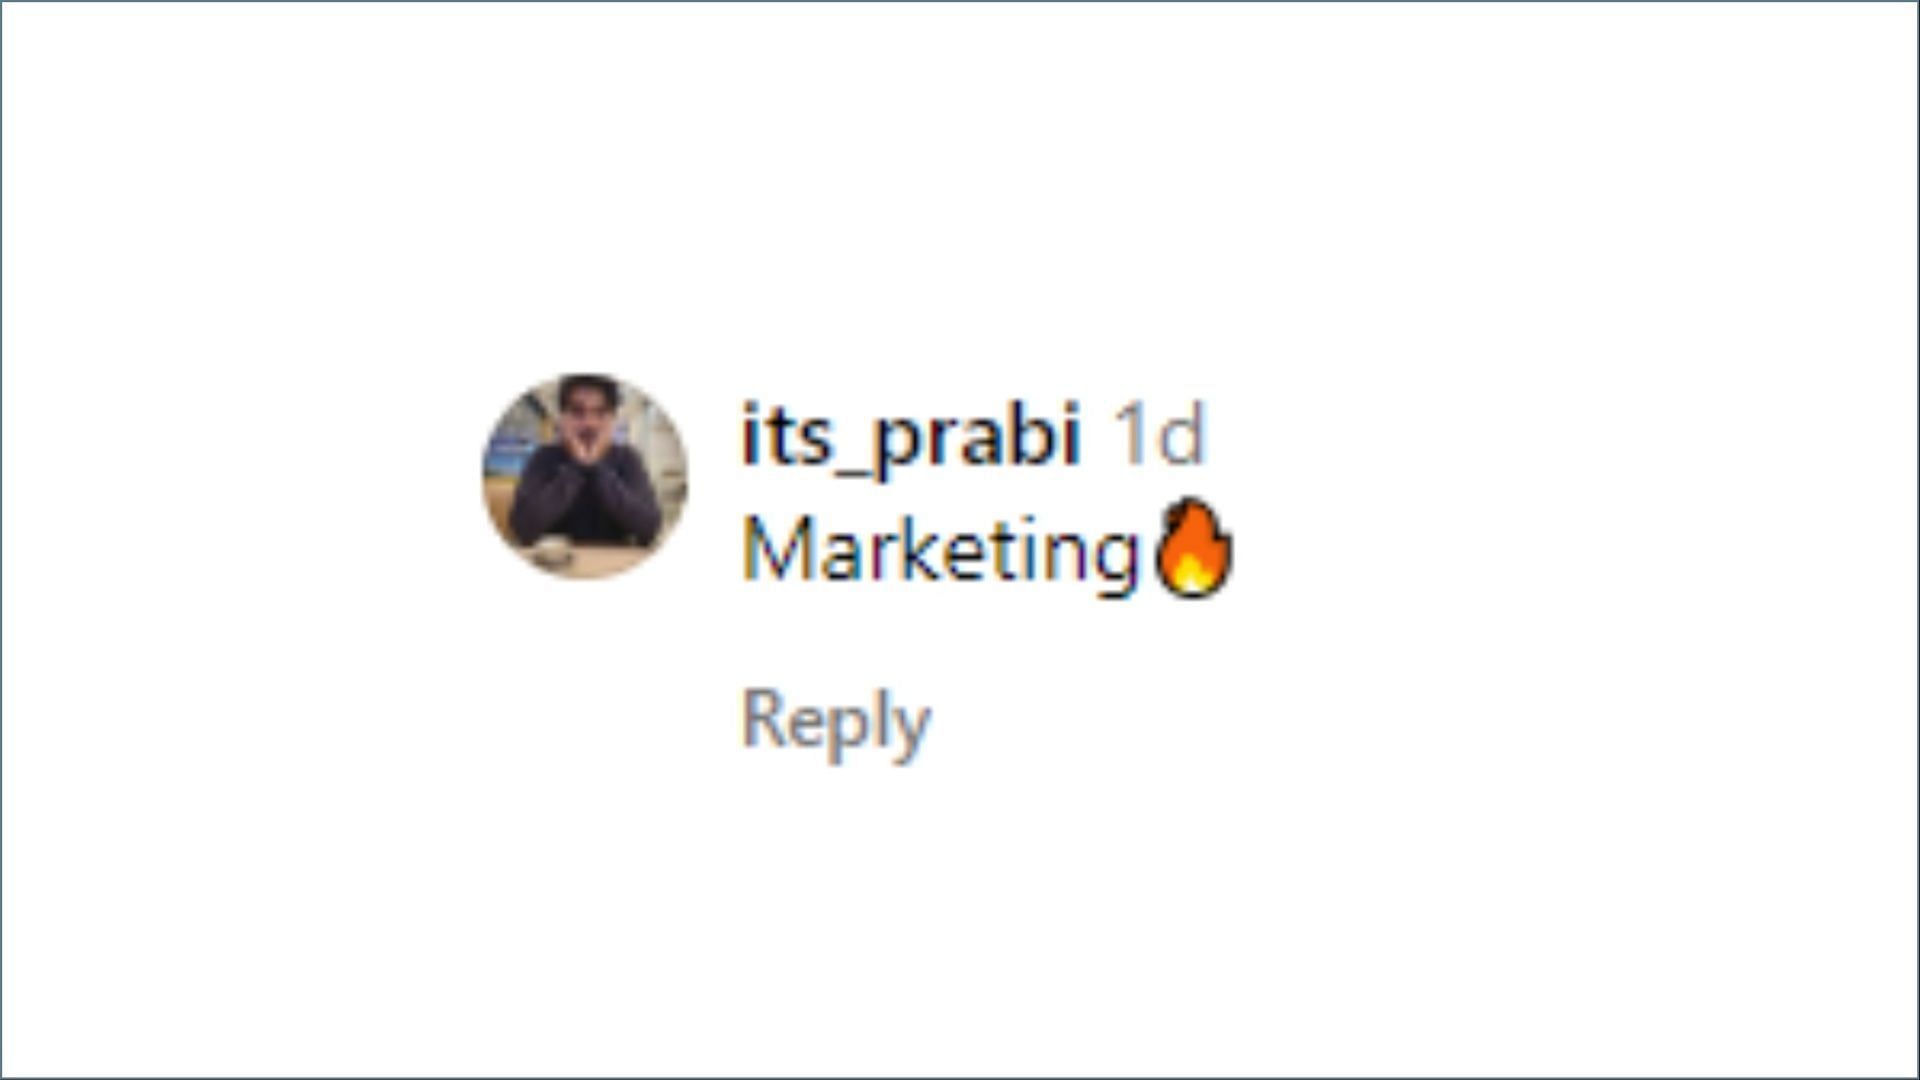 Comment by the user @its_prabi (Image via Instagram)